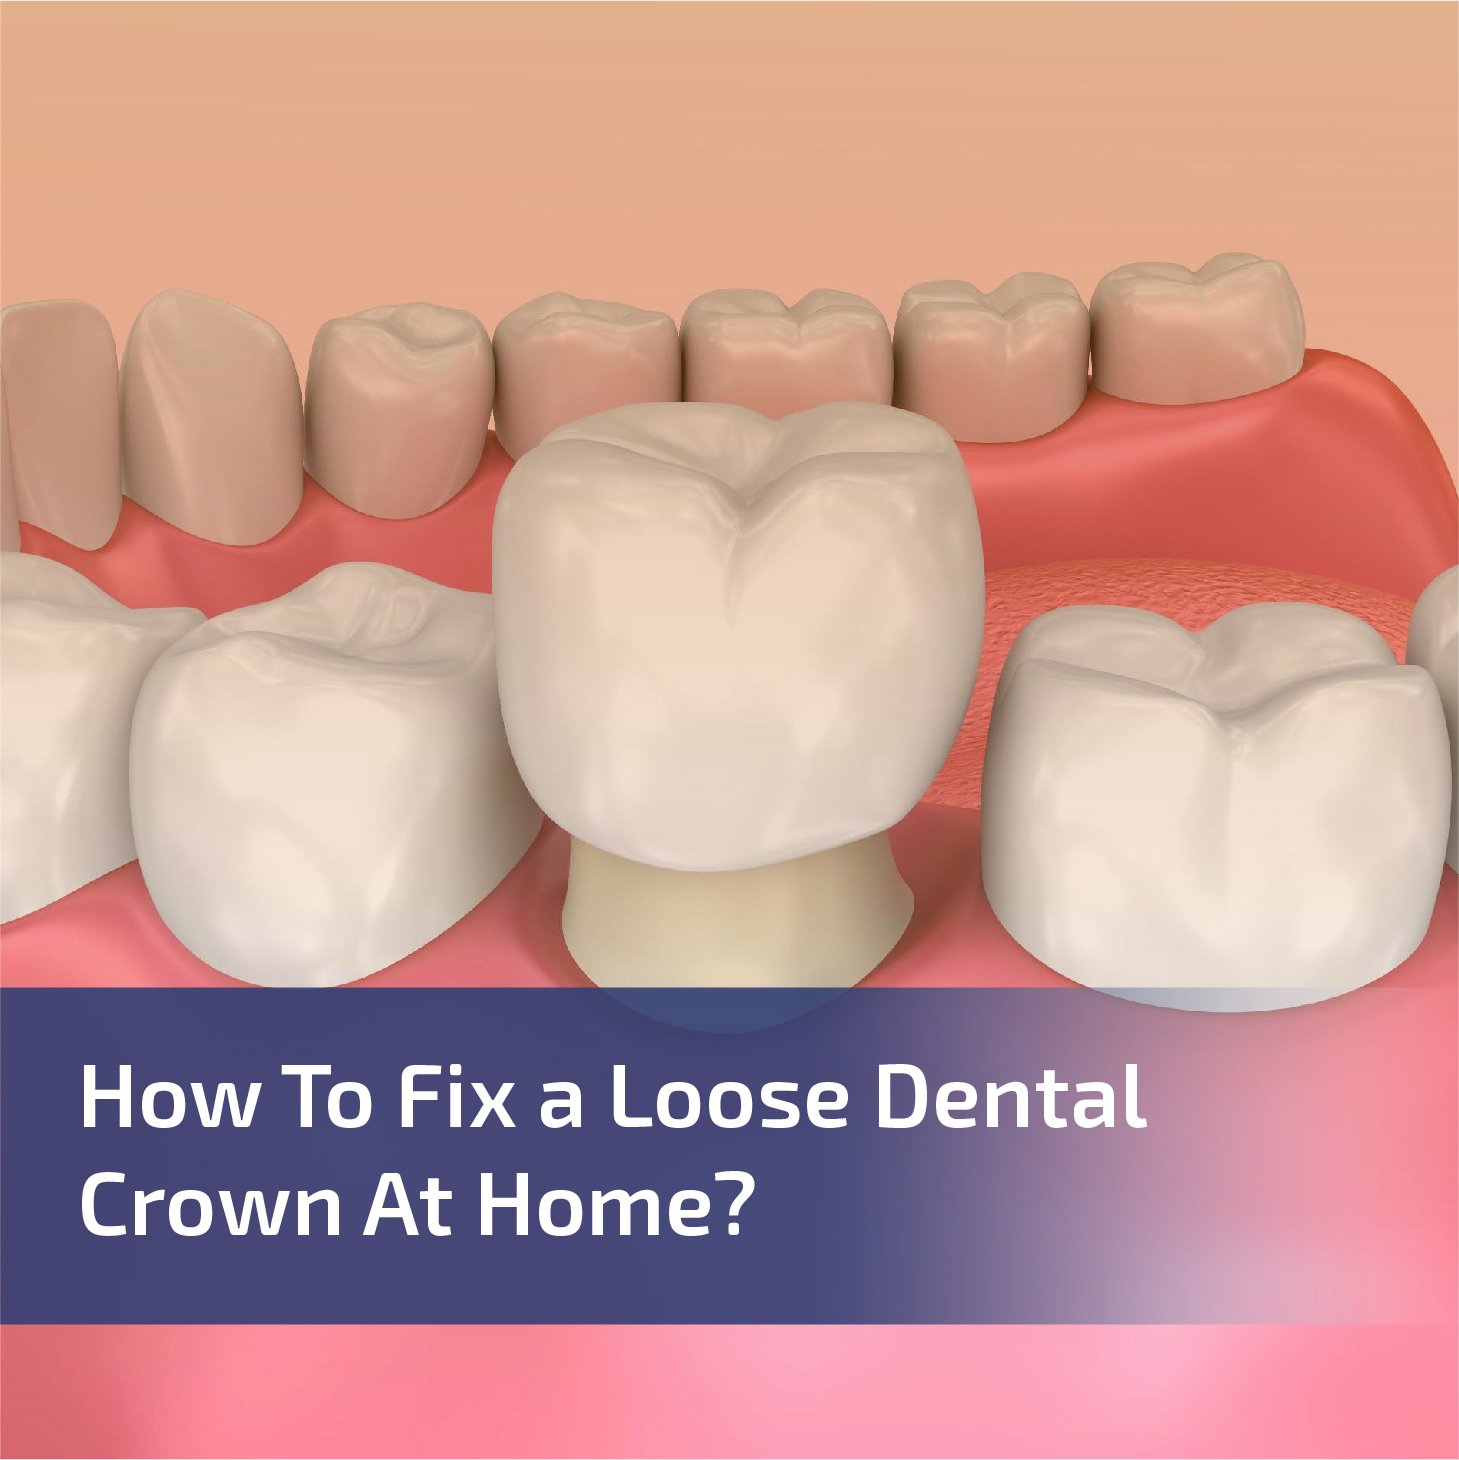 How to Fix a Loose Dental Crown At Home